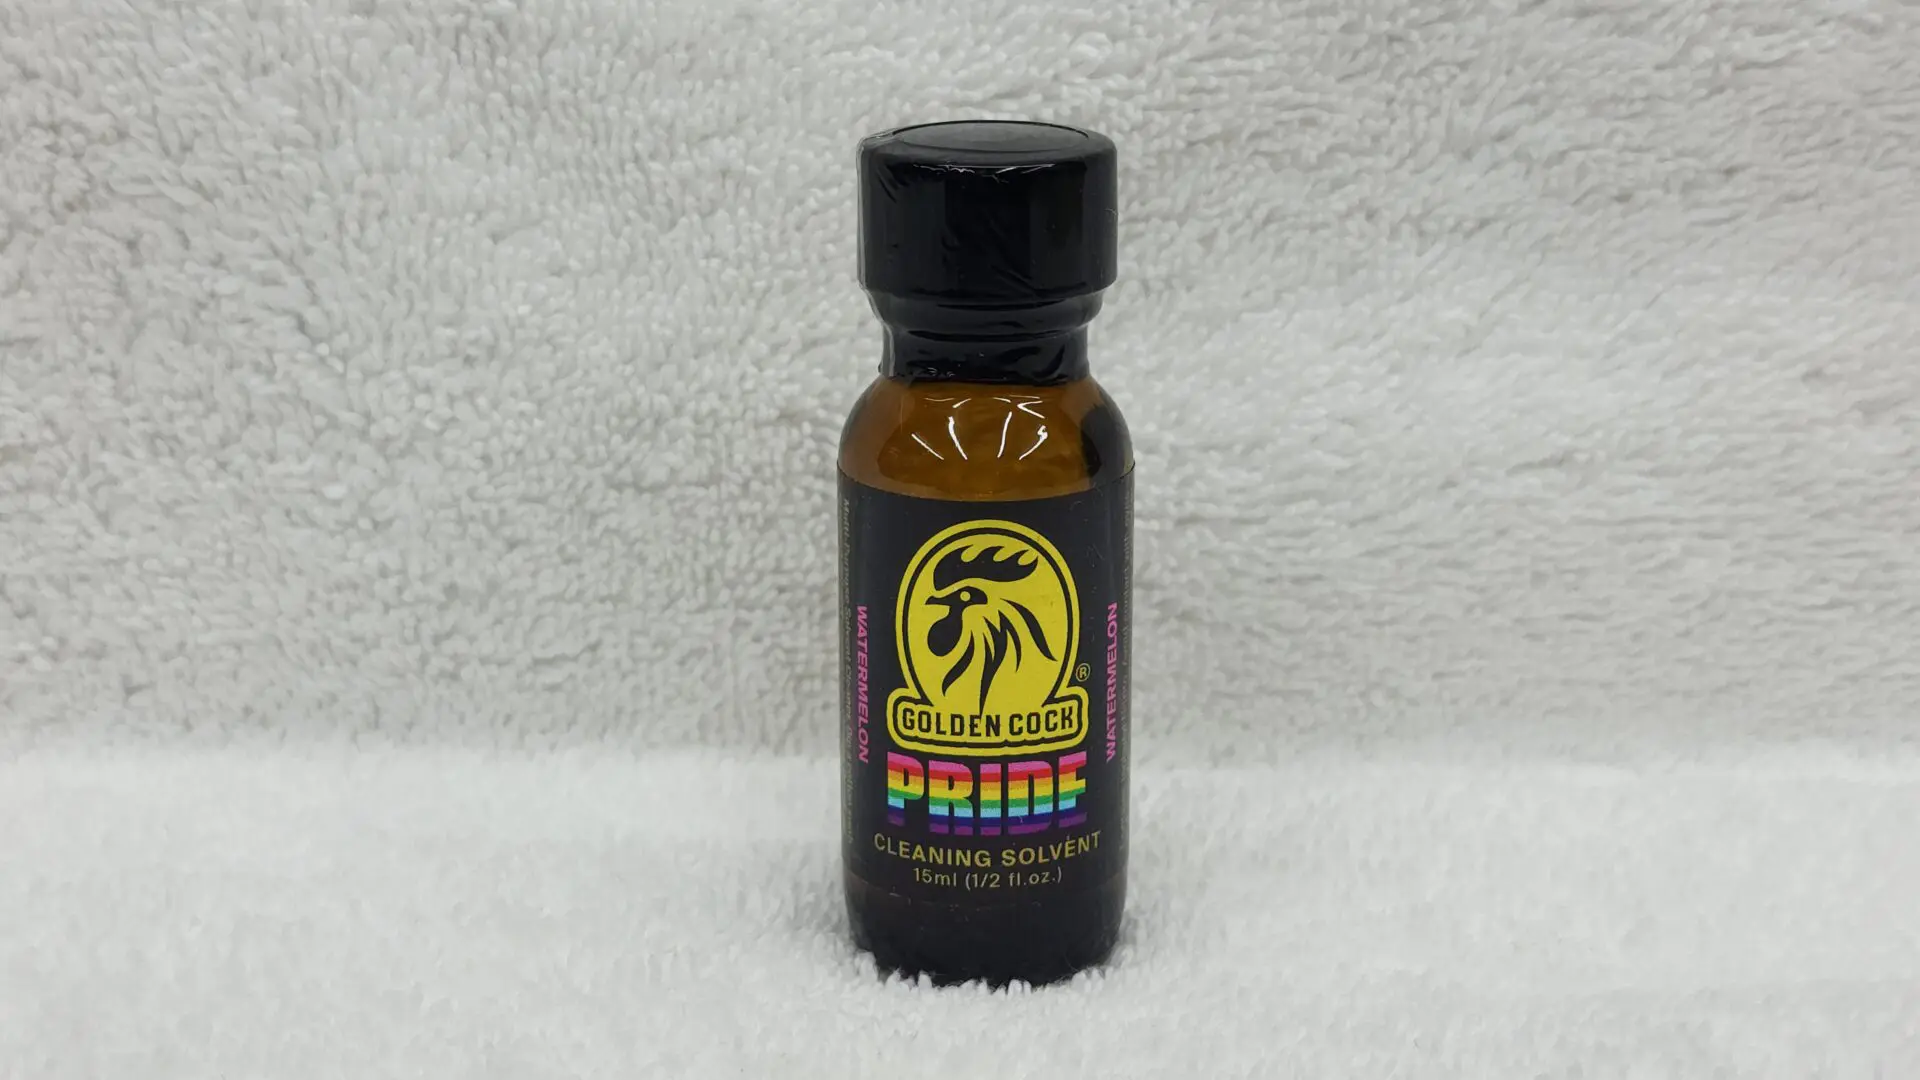 A small bottle labeled "Golden Cock Pride" on a white textured background.